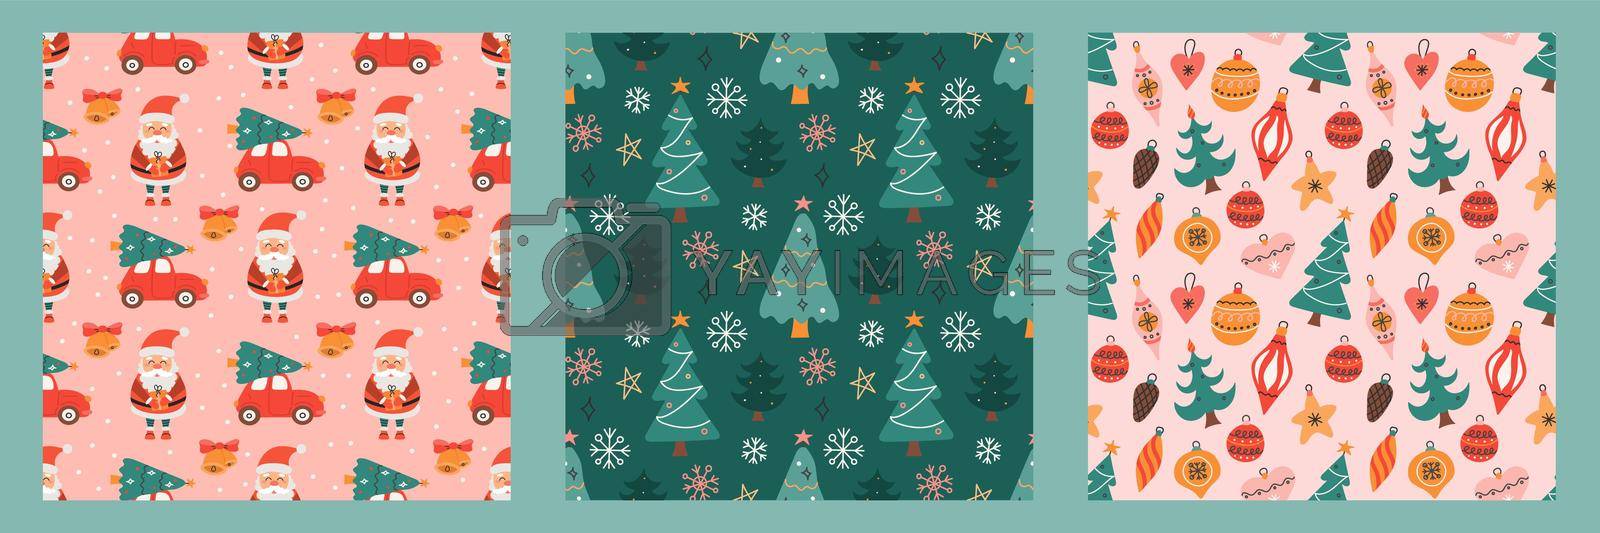 Royalty free image of Set of seamless patterns for Christmas and New Year. Vector cute holiday backgrounds by vetriciya_art